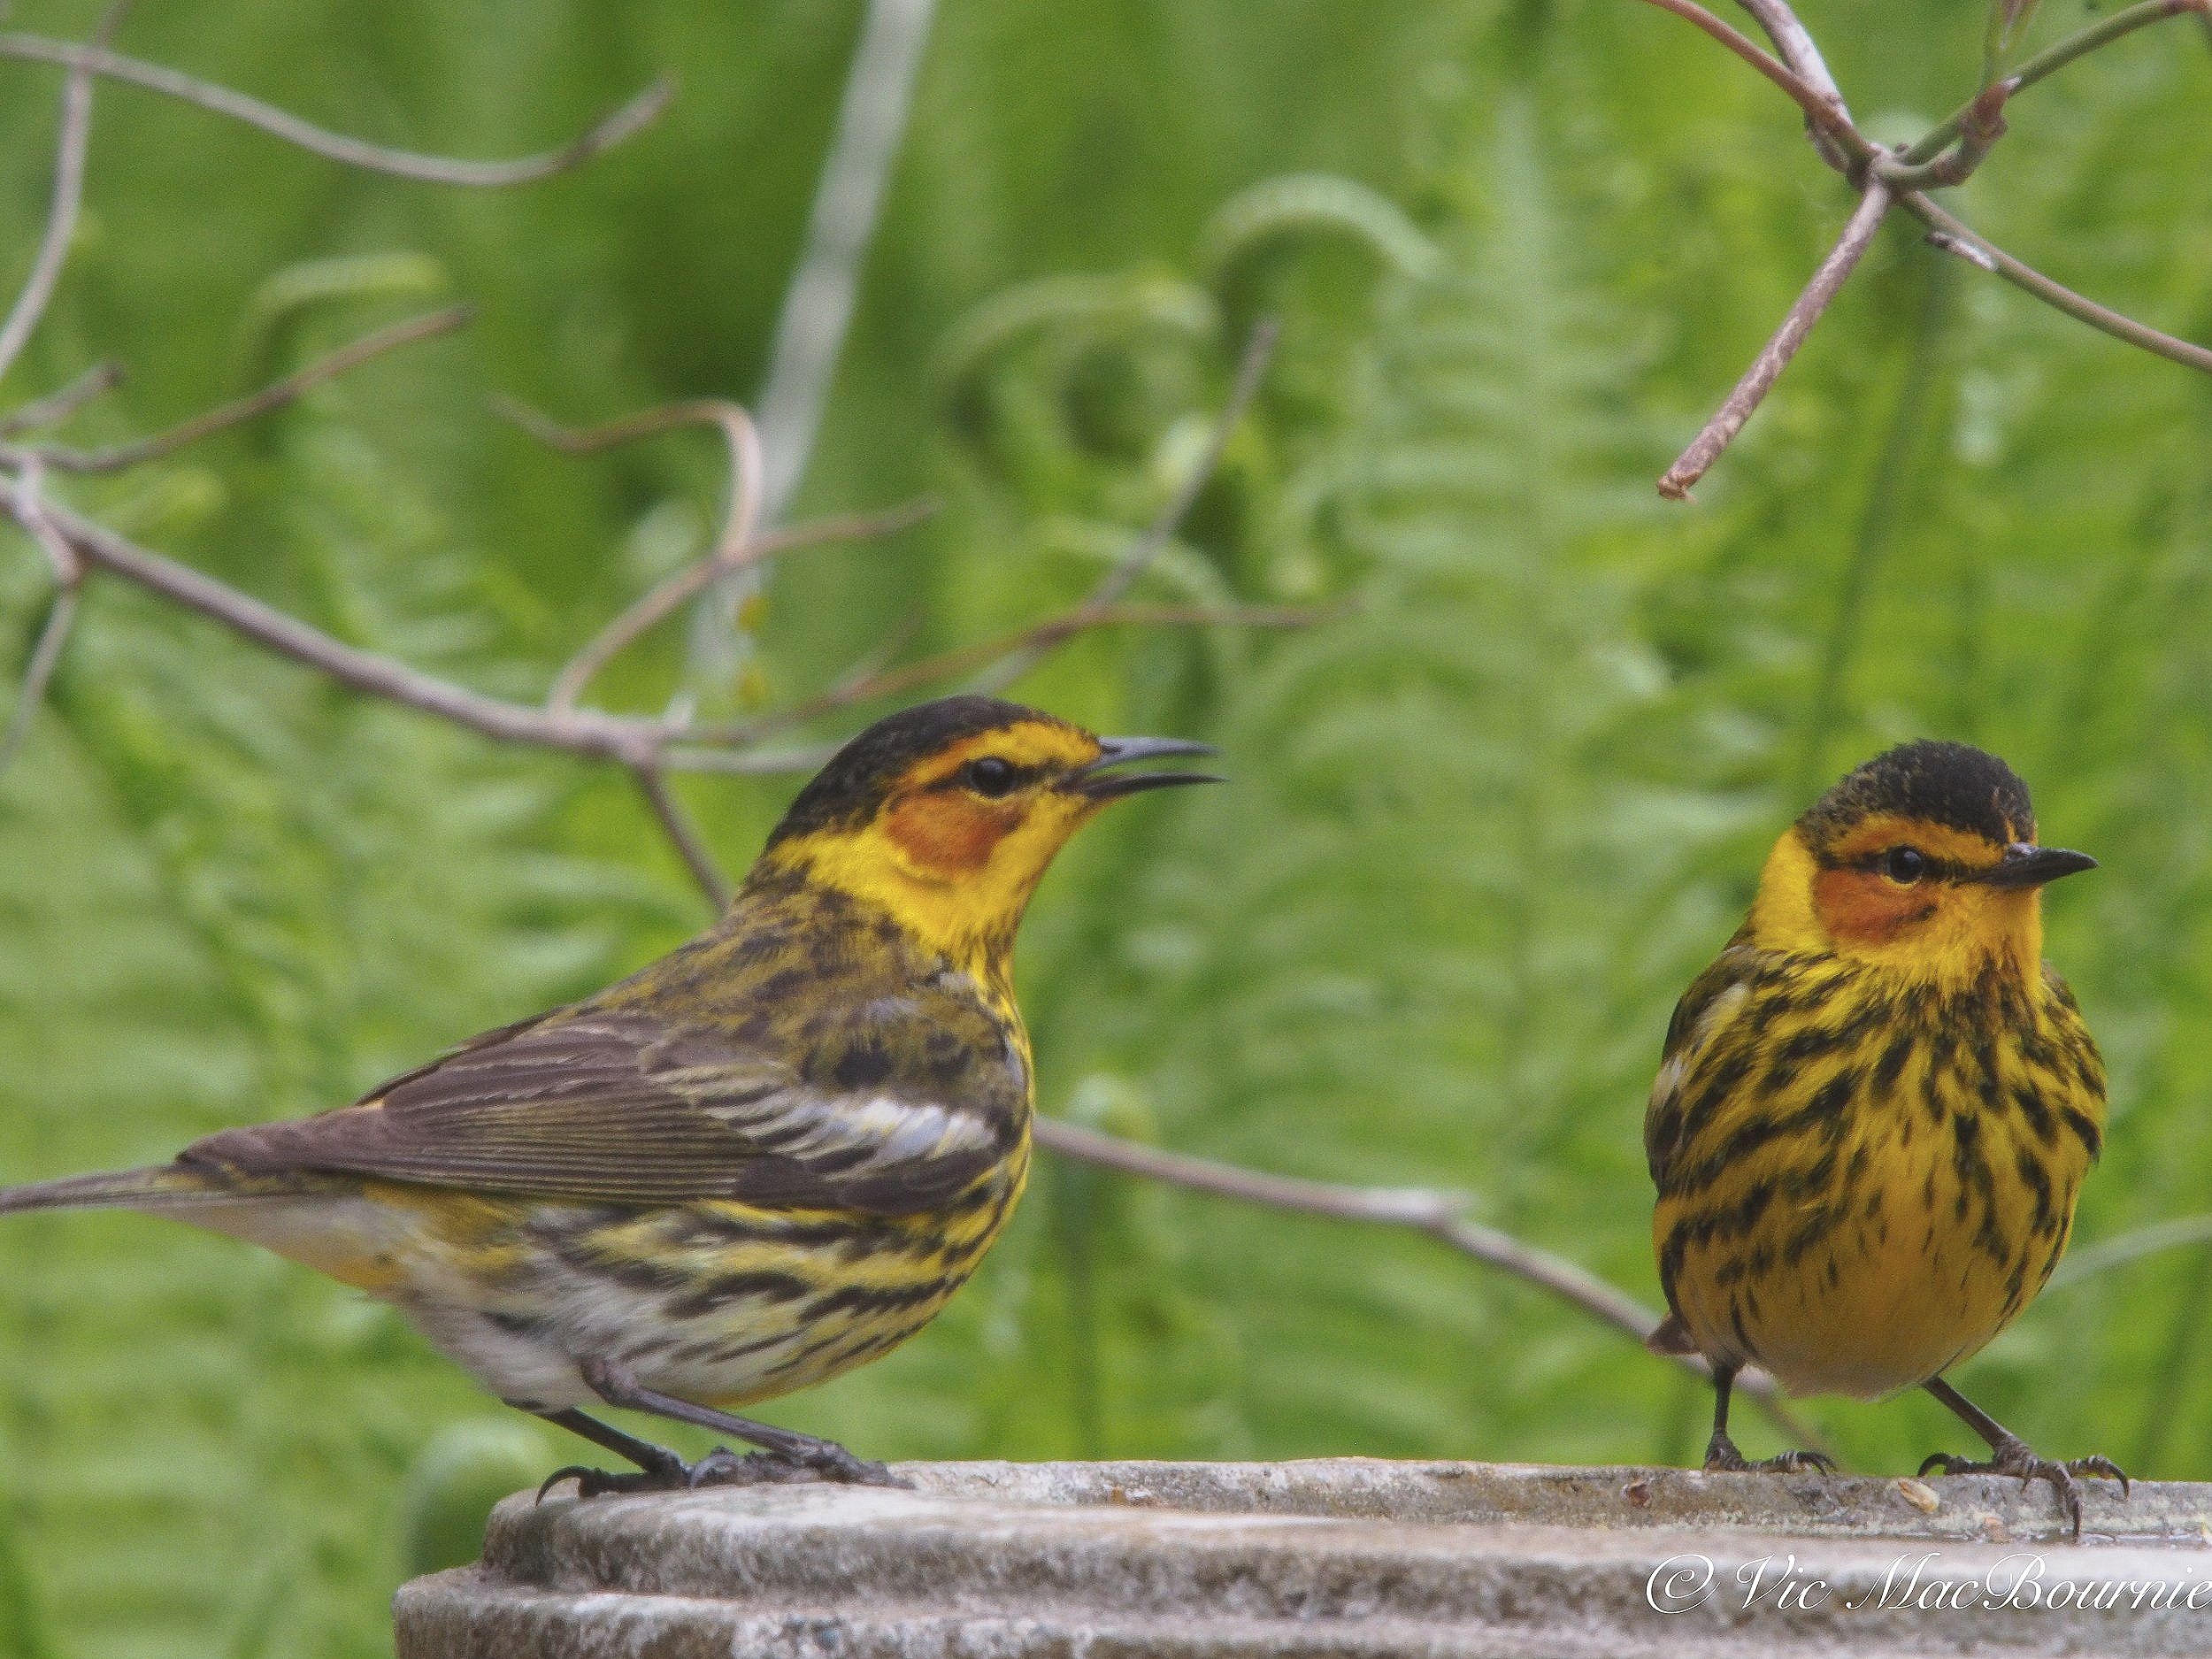 An unusual imge of two Cape May warblers at a bird bath.